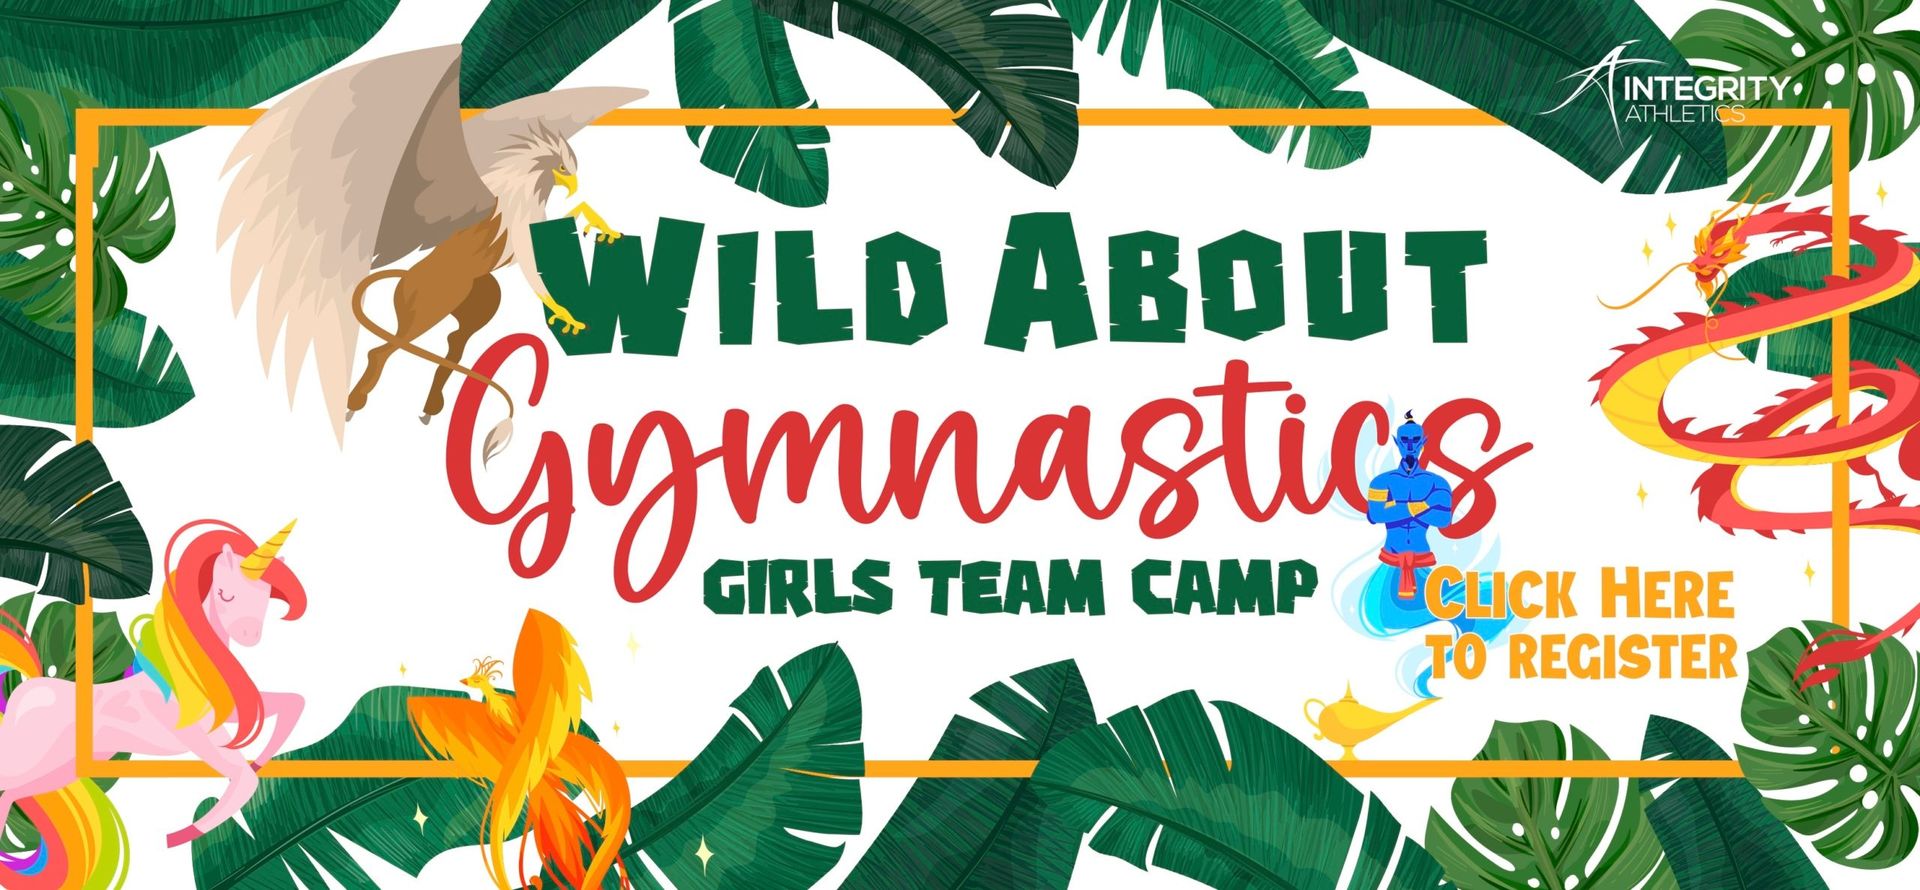 A poster for a wild about gymnastics girls team camp